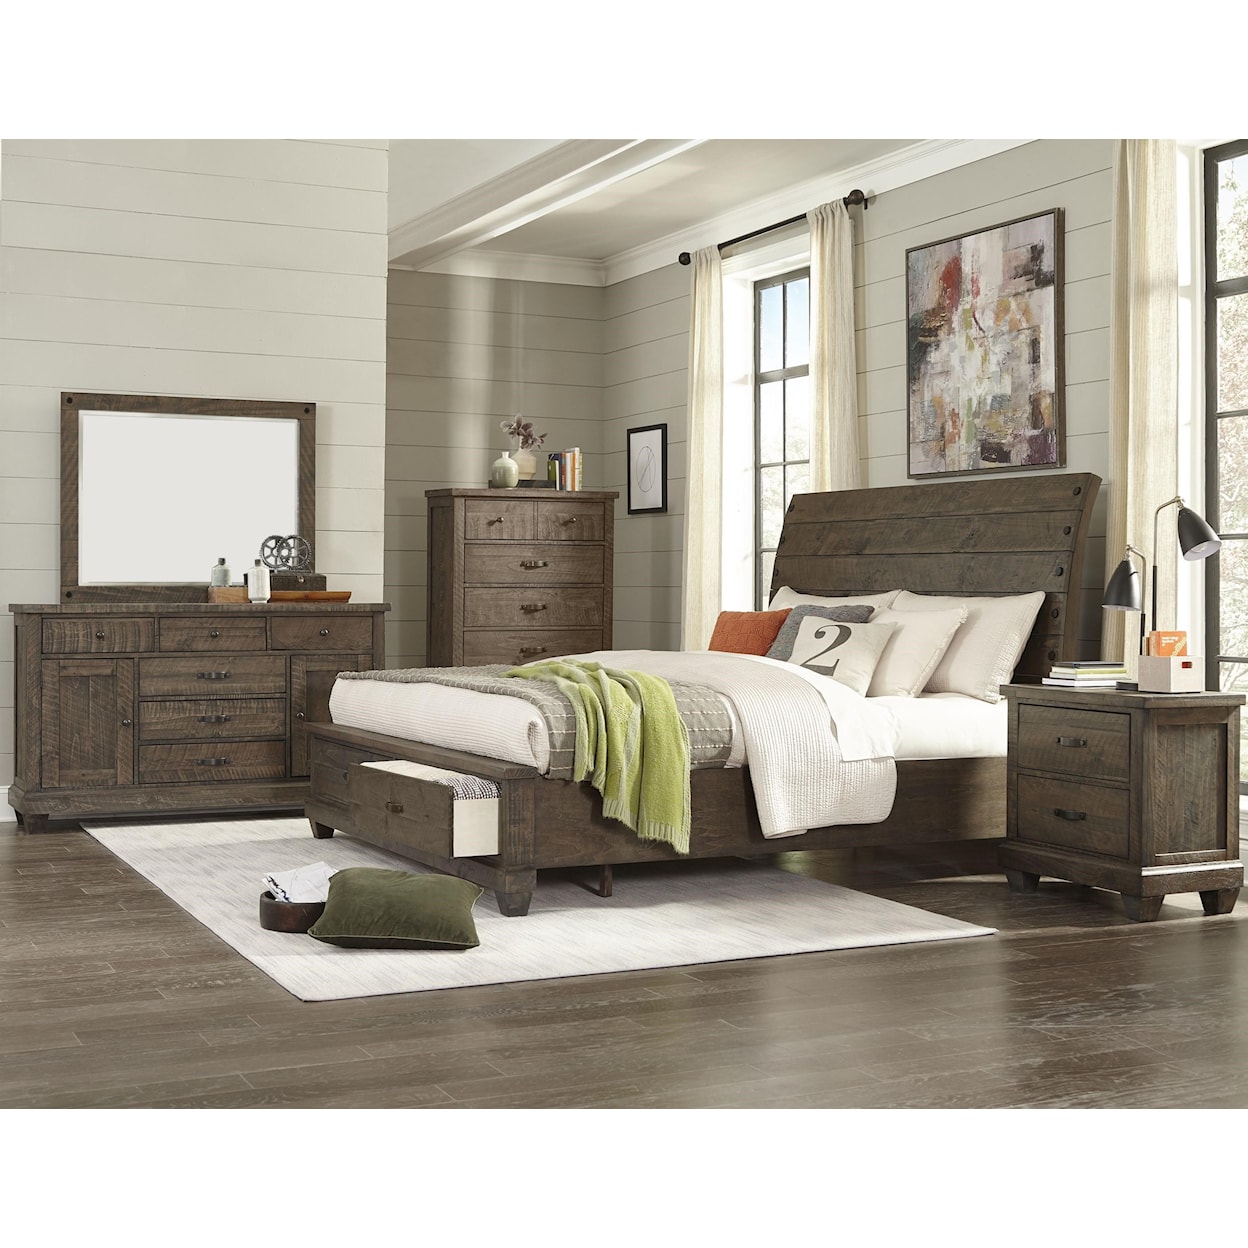 Lifestyle JD Mex King 5 Piece Bedroom Group